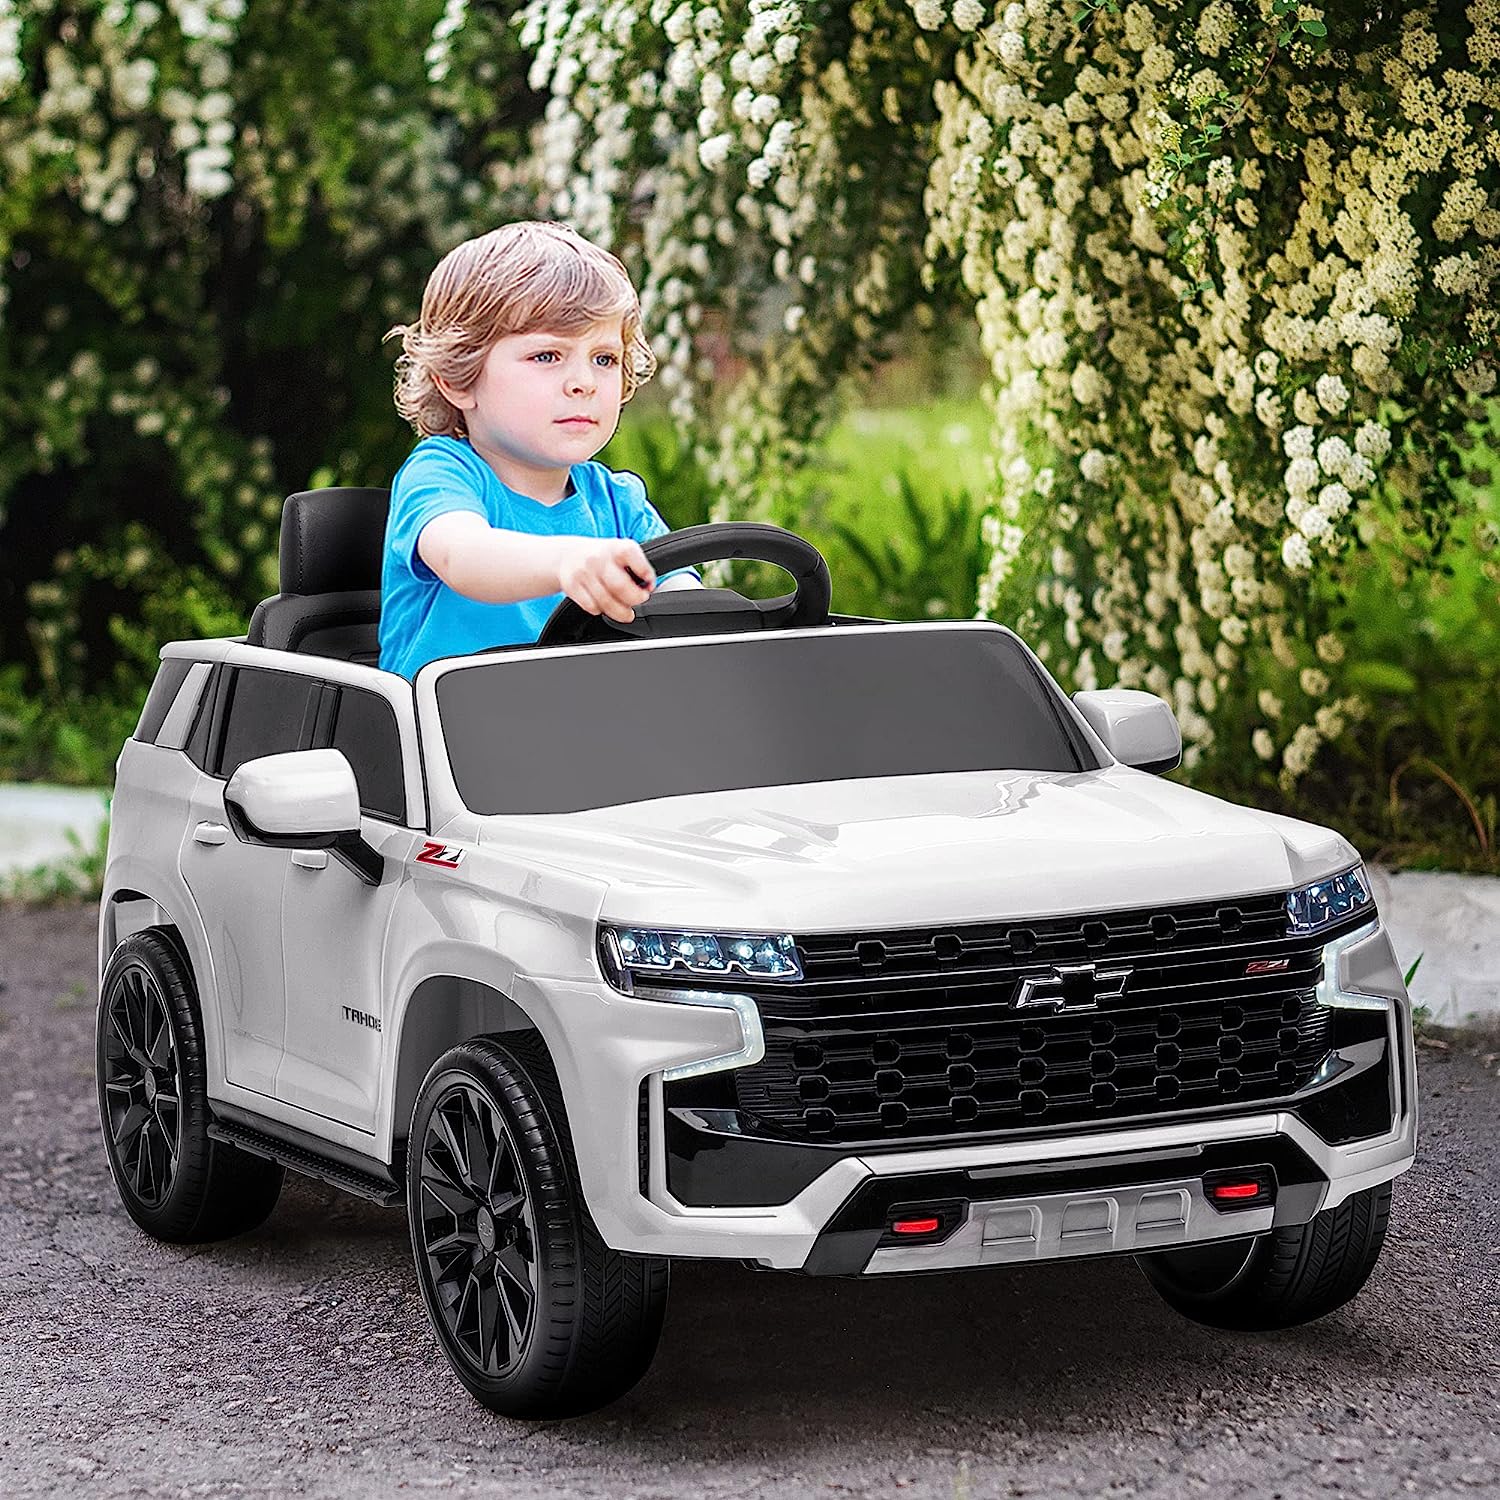 2023 Chevrolet Tahoe Car | 1 Seater > 12V (2x2) | Electric Riding Vehicle for Kids